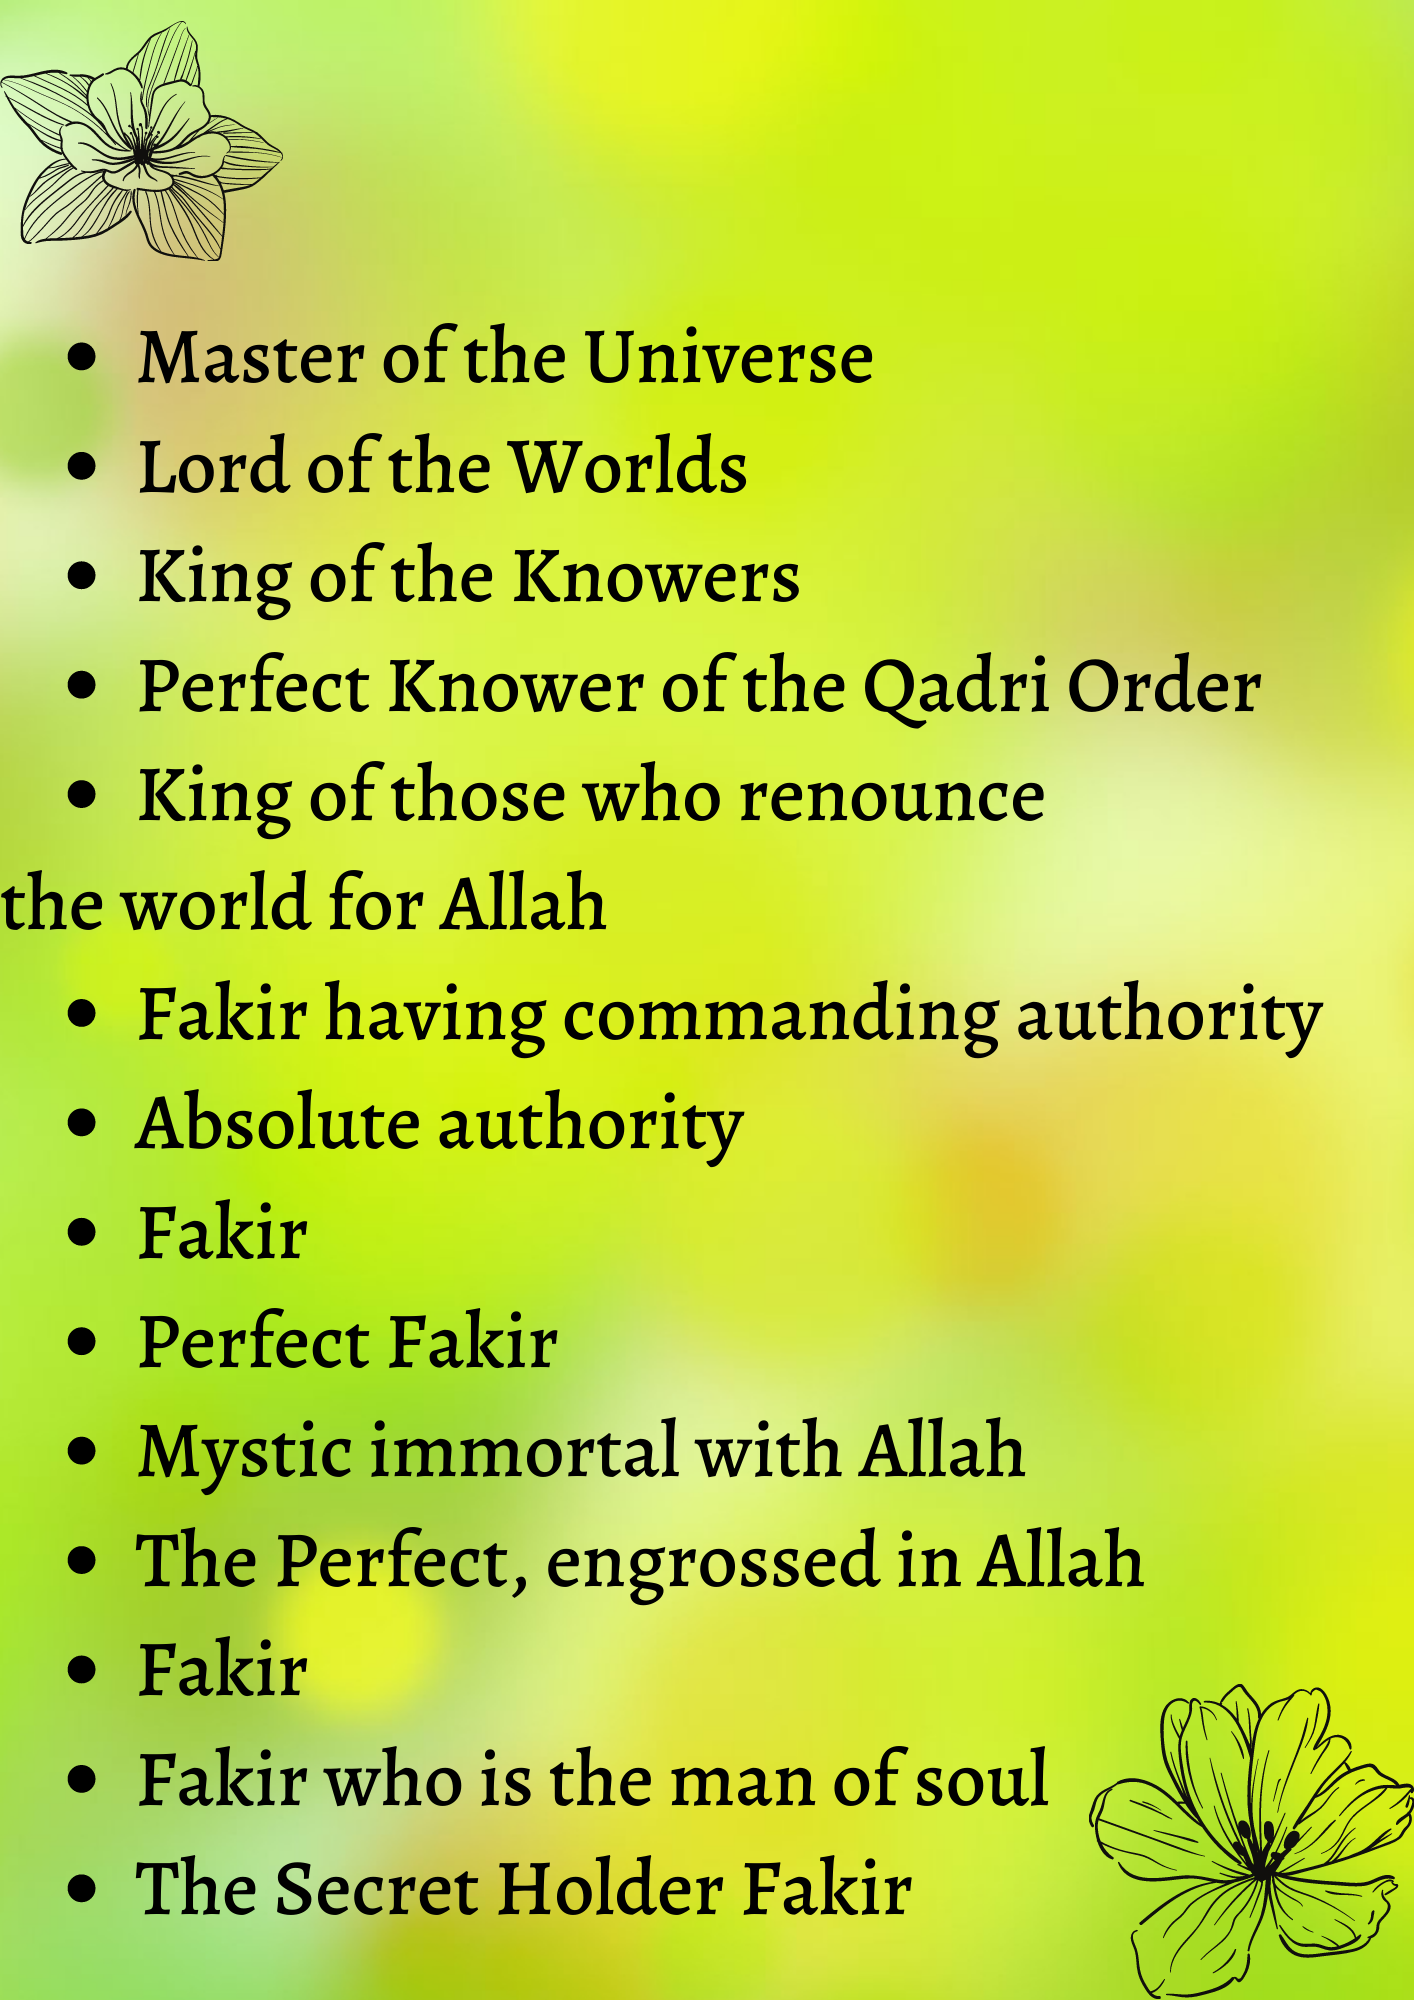 Different terms used for al-insan-e-kamil